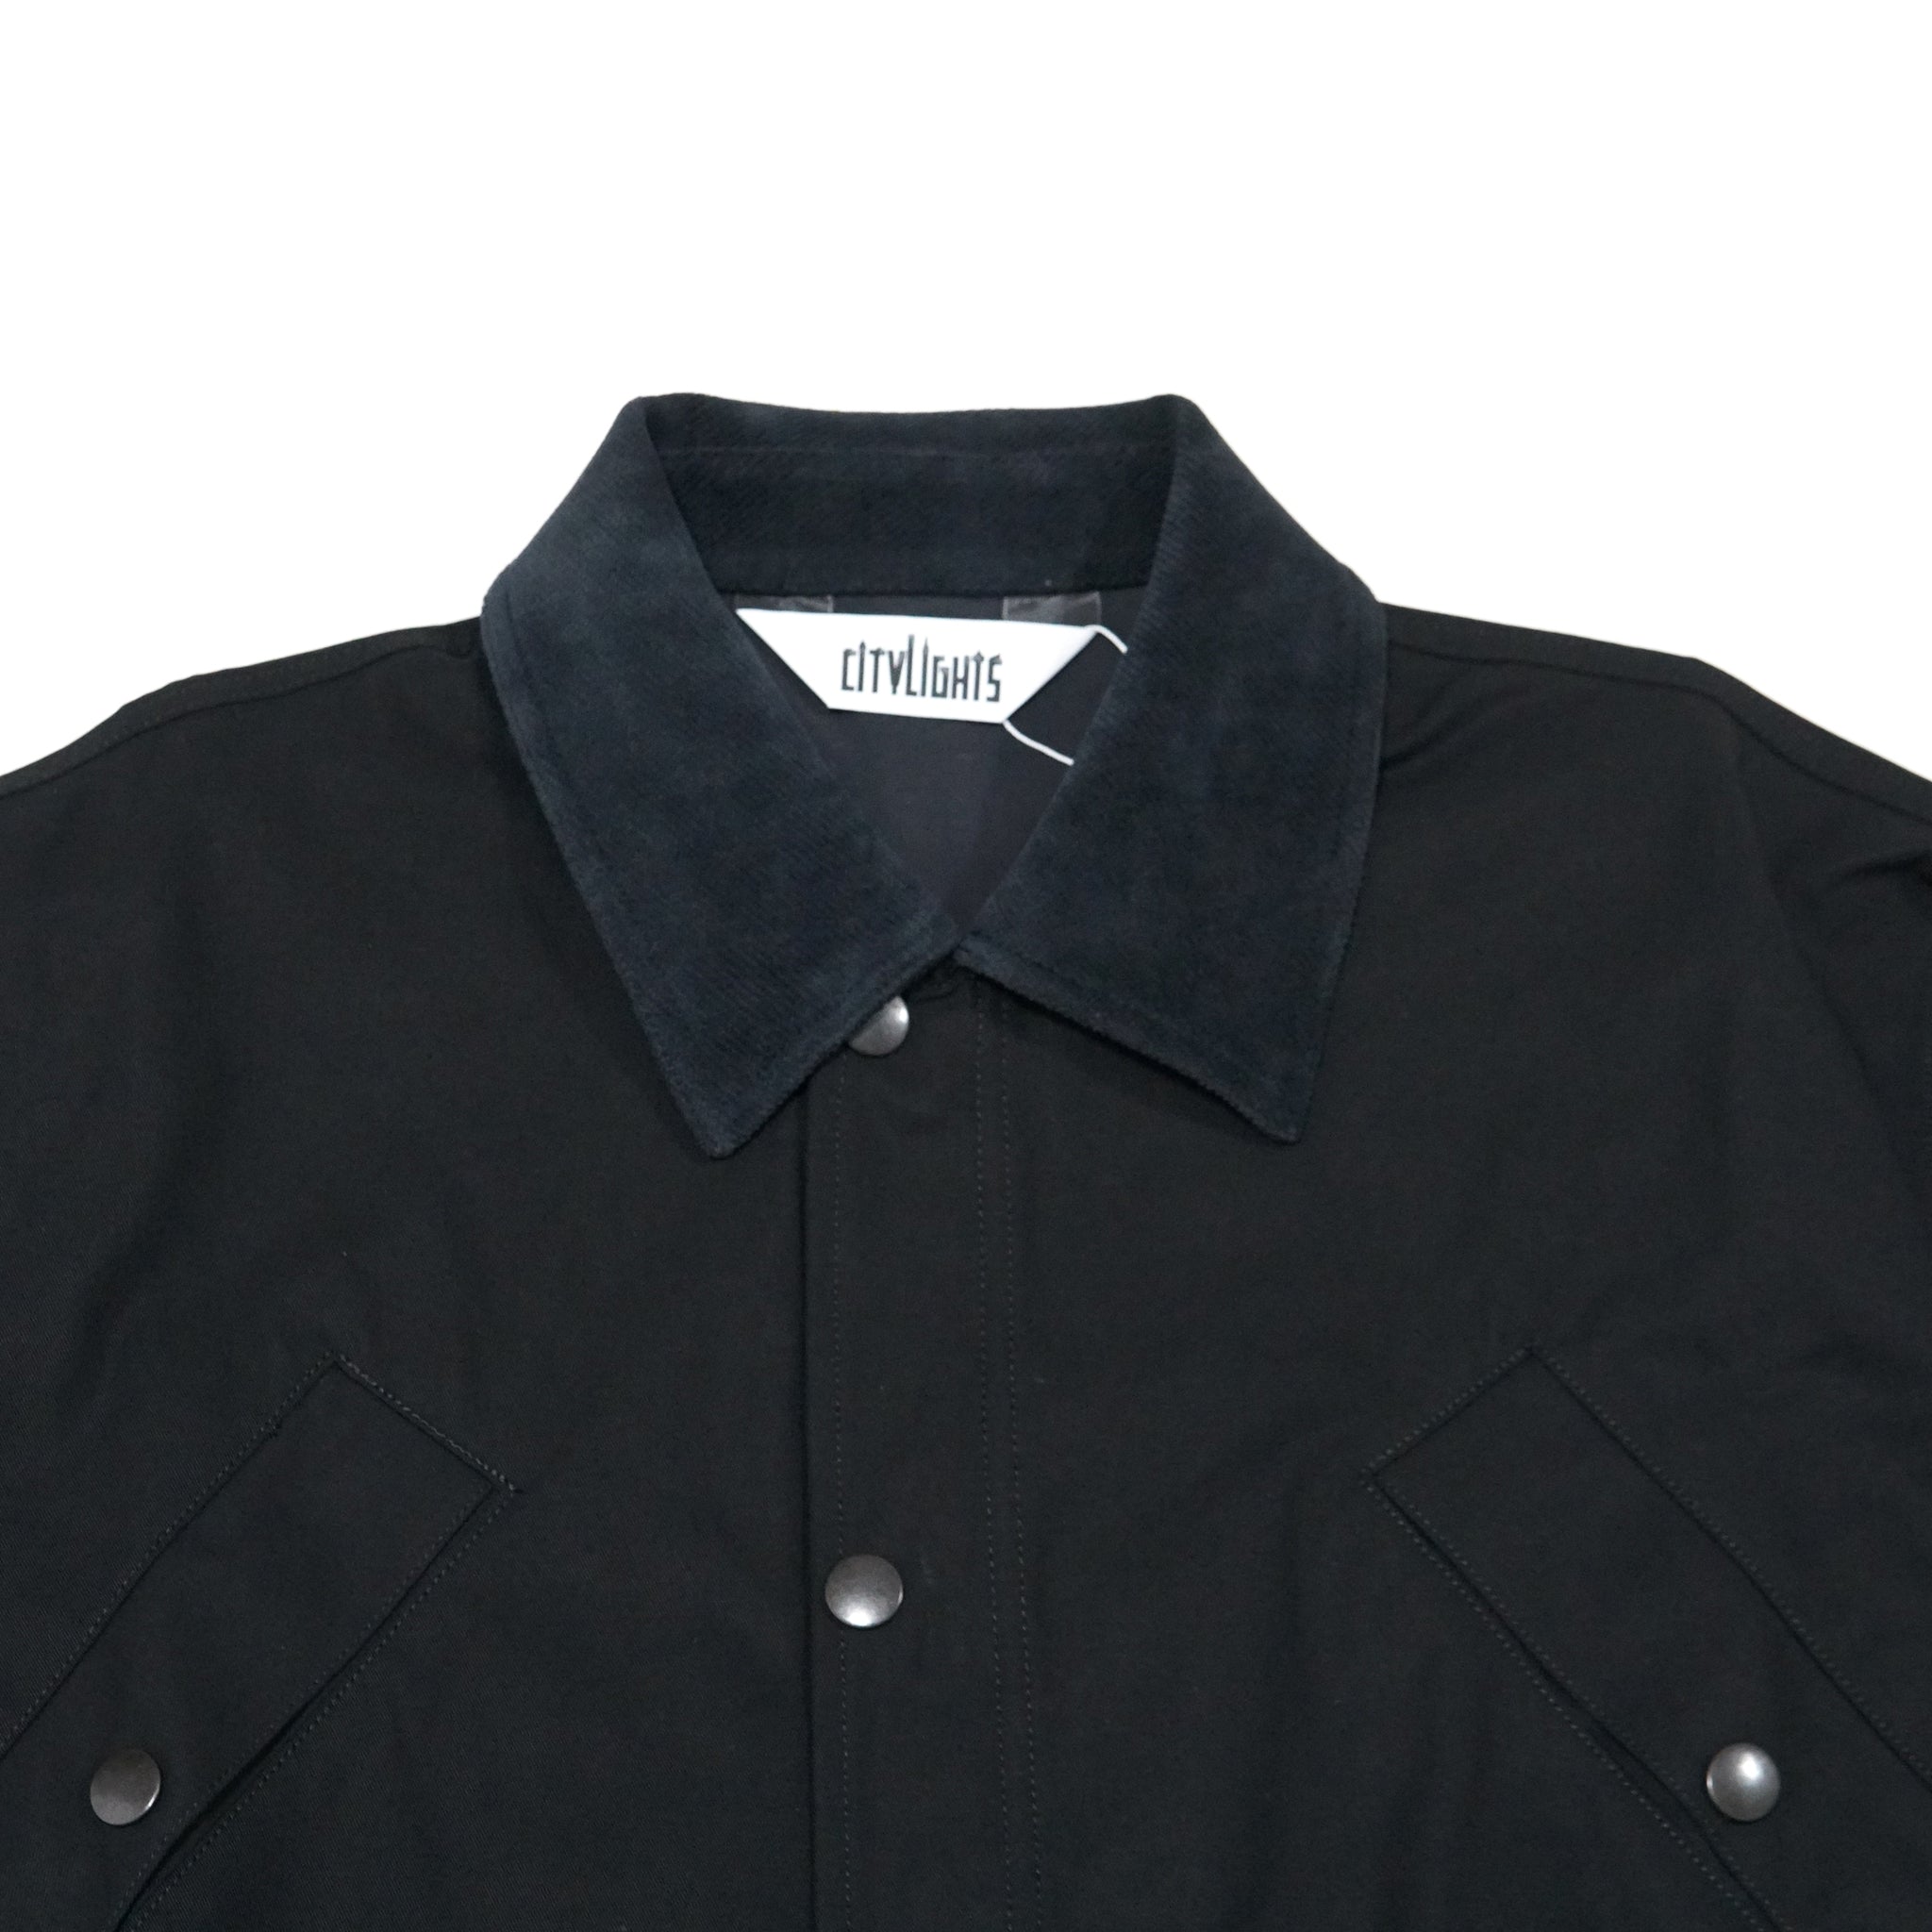 Name: JUNGLE JACKET-Black | Color: Black | Size: One Size 【CITYLIGHTS PRODUCTS_シティライツプロダクツ】